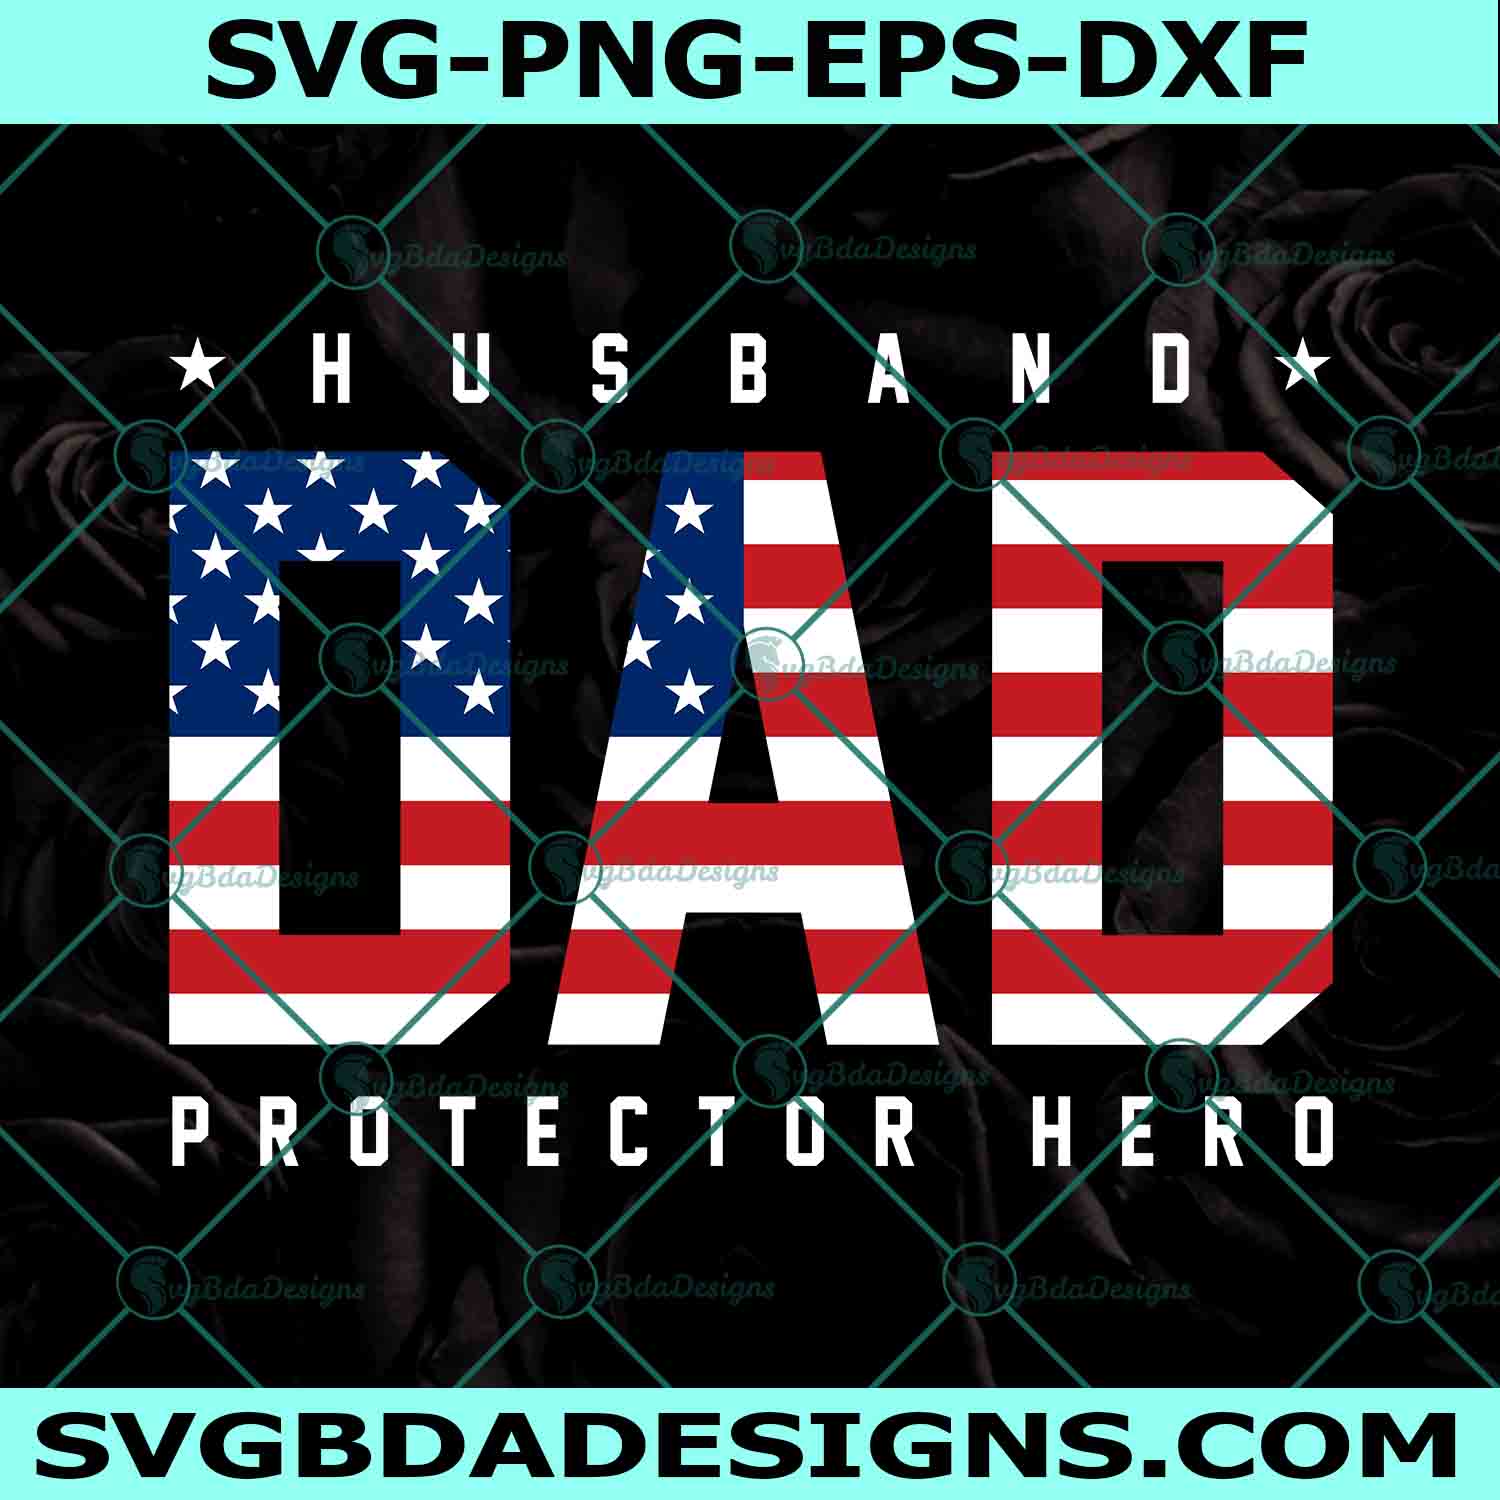 Father's day svg Daddy quote Father svg Daddy saying Svg Dxf Eps Ai Png Silhouette Cricut family svg Daddy Protector Hero svg